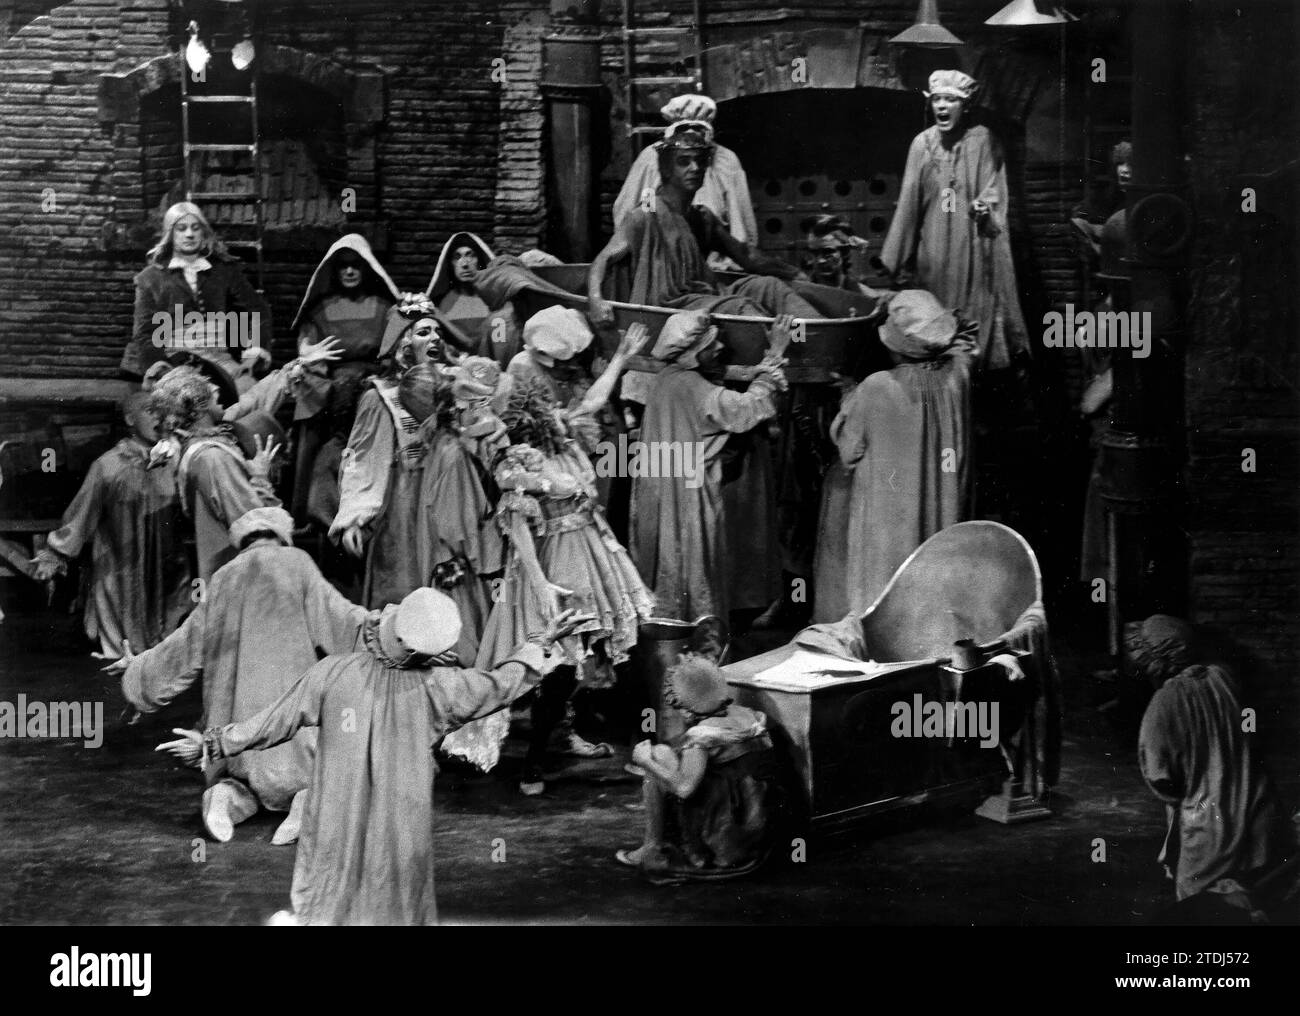 10/03/1968, performance of the Play 'Persecution and Murder of Jean Paul Marat Represented by the Inmates of the Charenton Asylum under the direction of Mr. Sade' By Adolfo Marsillach. Marsillach himself plays Sade and José María Prada plays Marat. With this work, a new stage begins for the national chamber and rehearsal theater. Credit: Album / Archivo ABC / Manuel Sanz Bermejo Stock Photo